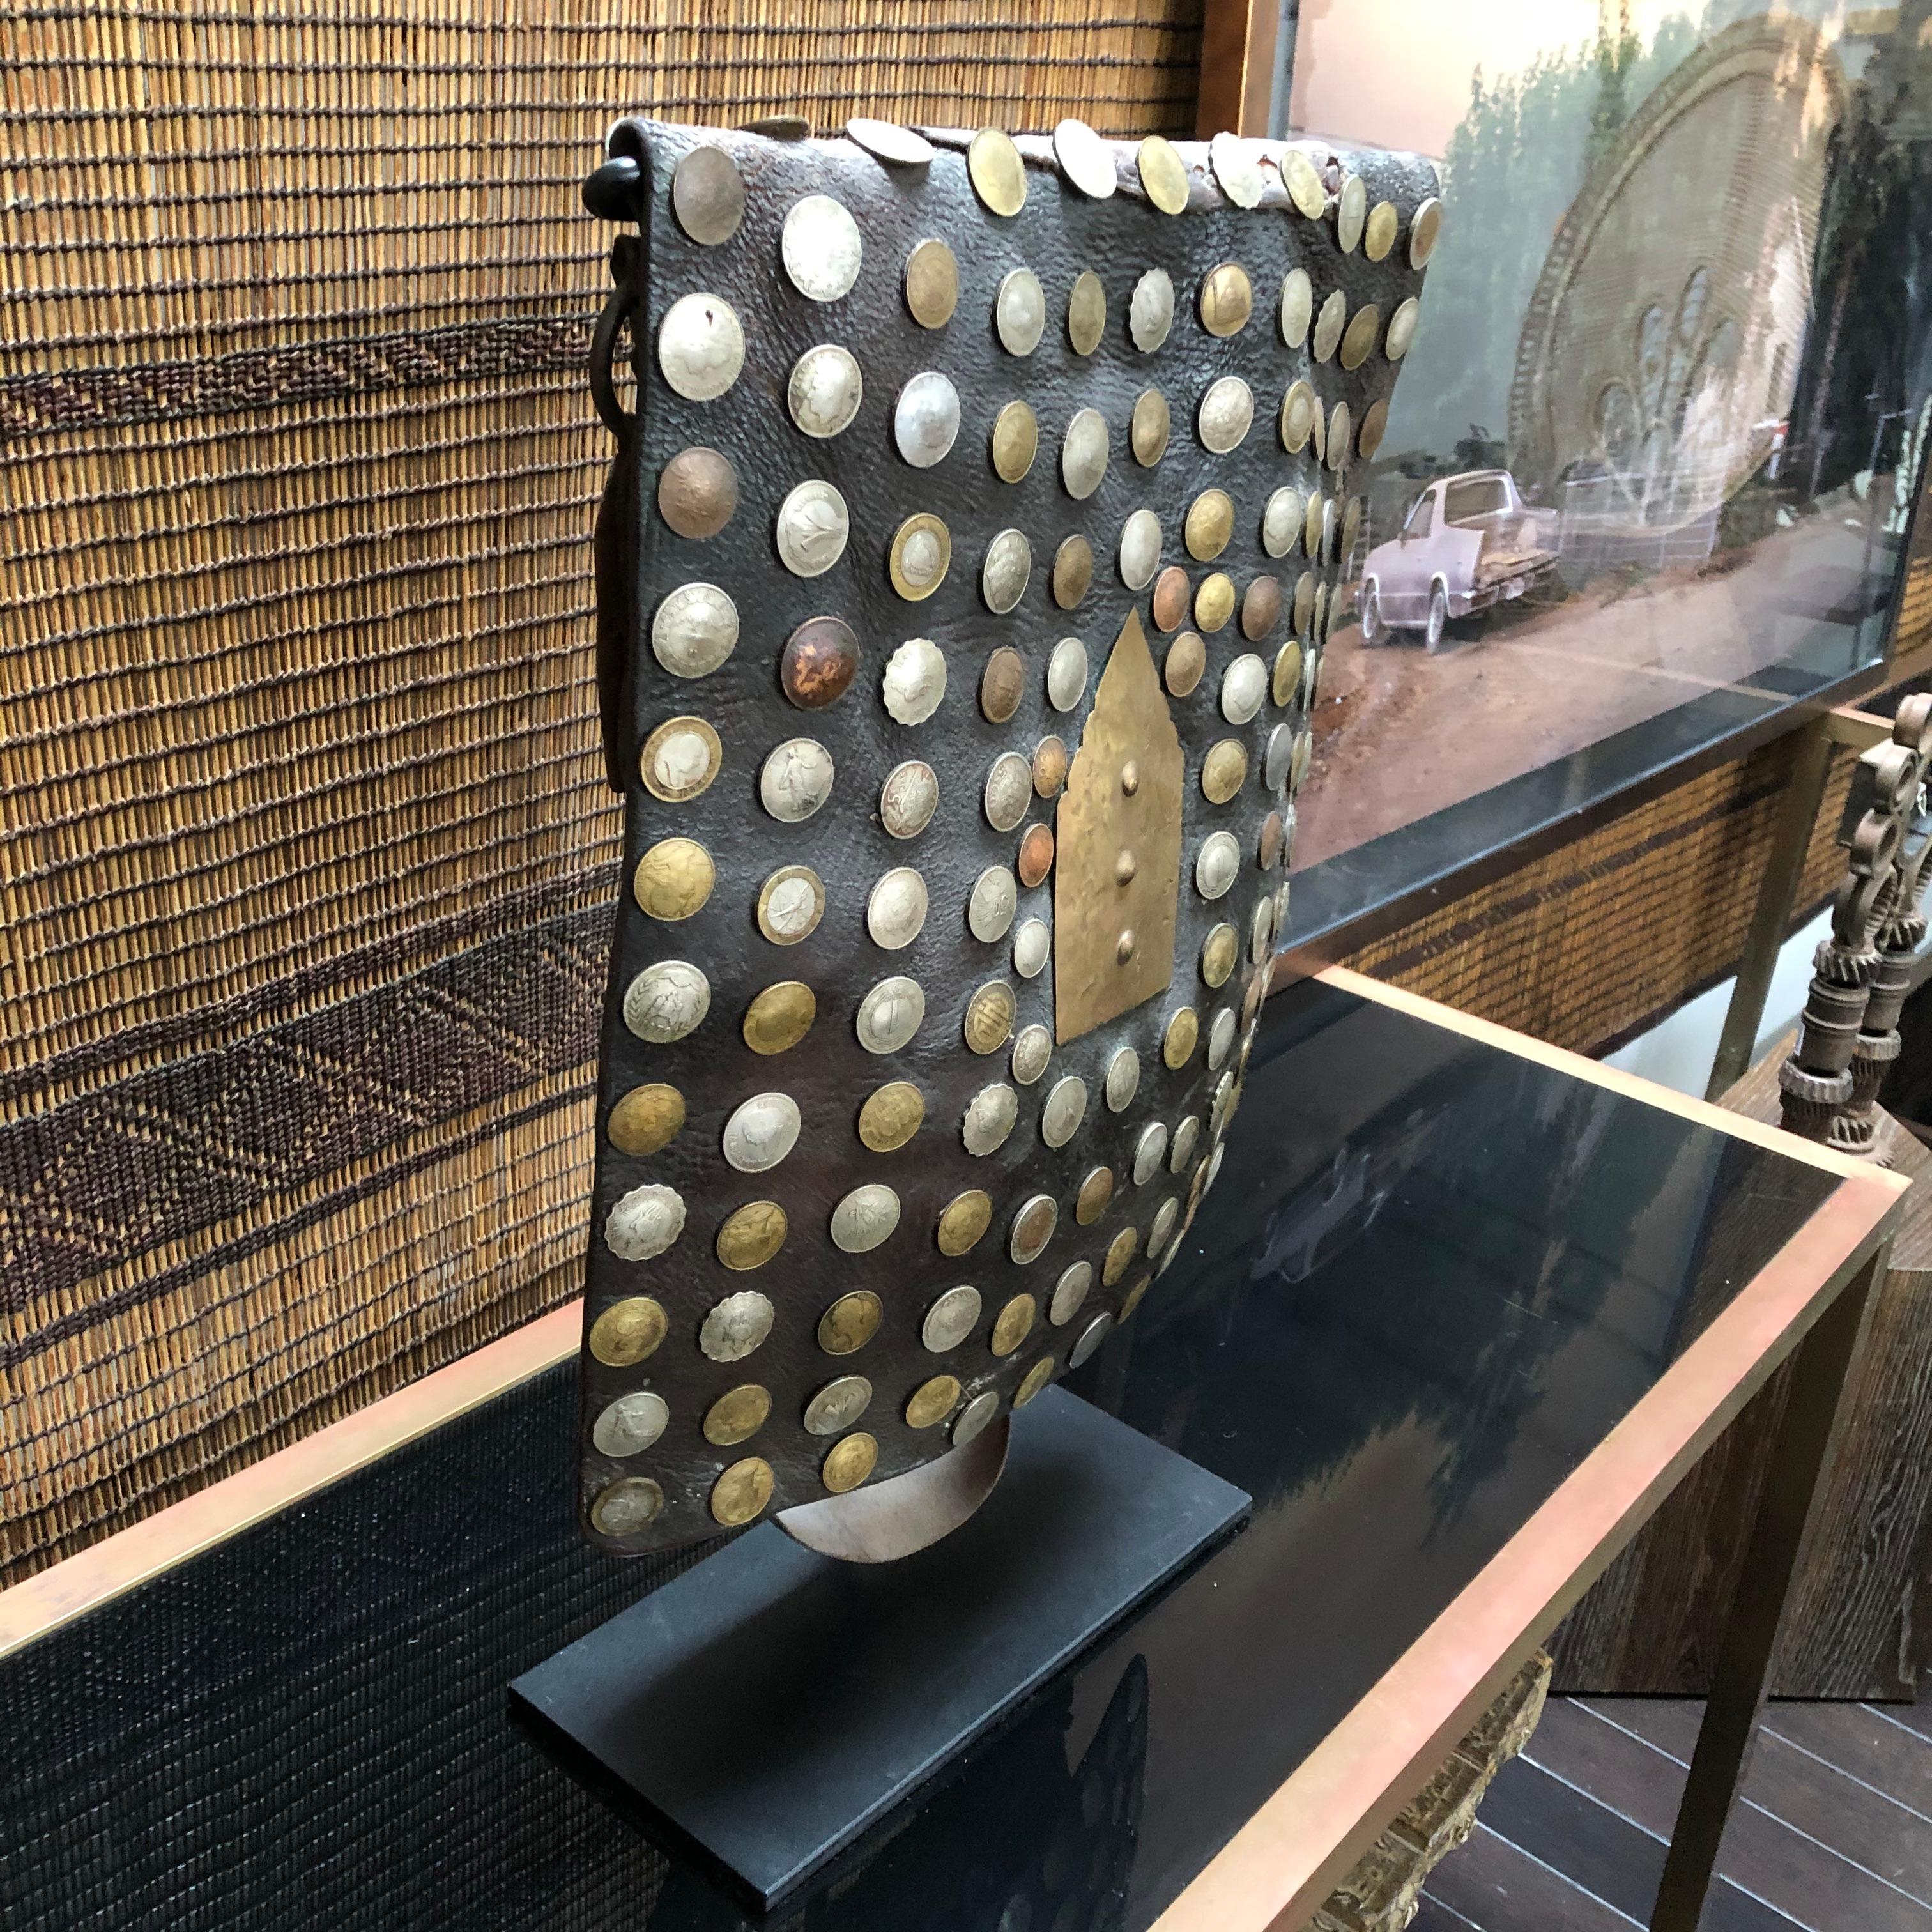 A vintage handcrafted leather water carrier bag from Morocco on a stand. Handmade with camel hide and decorated with antiqued coins from around the world. 

Traditionally made for water sellers in order to carry water through markets and sell to